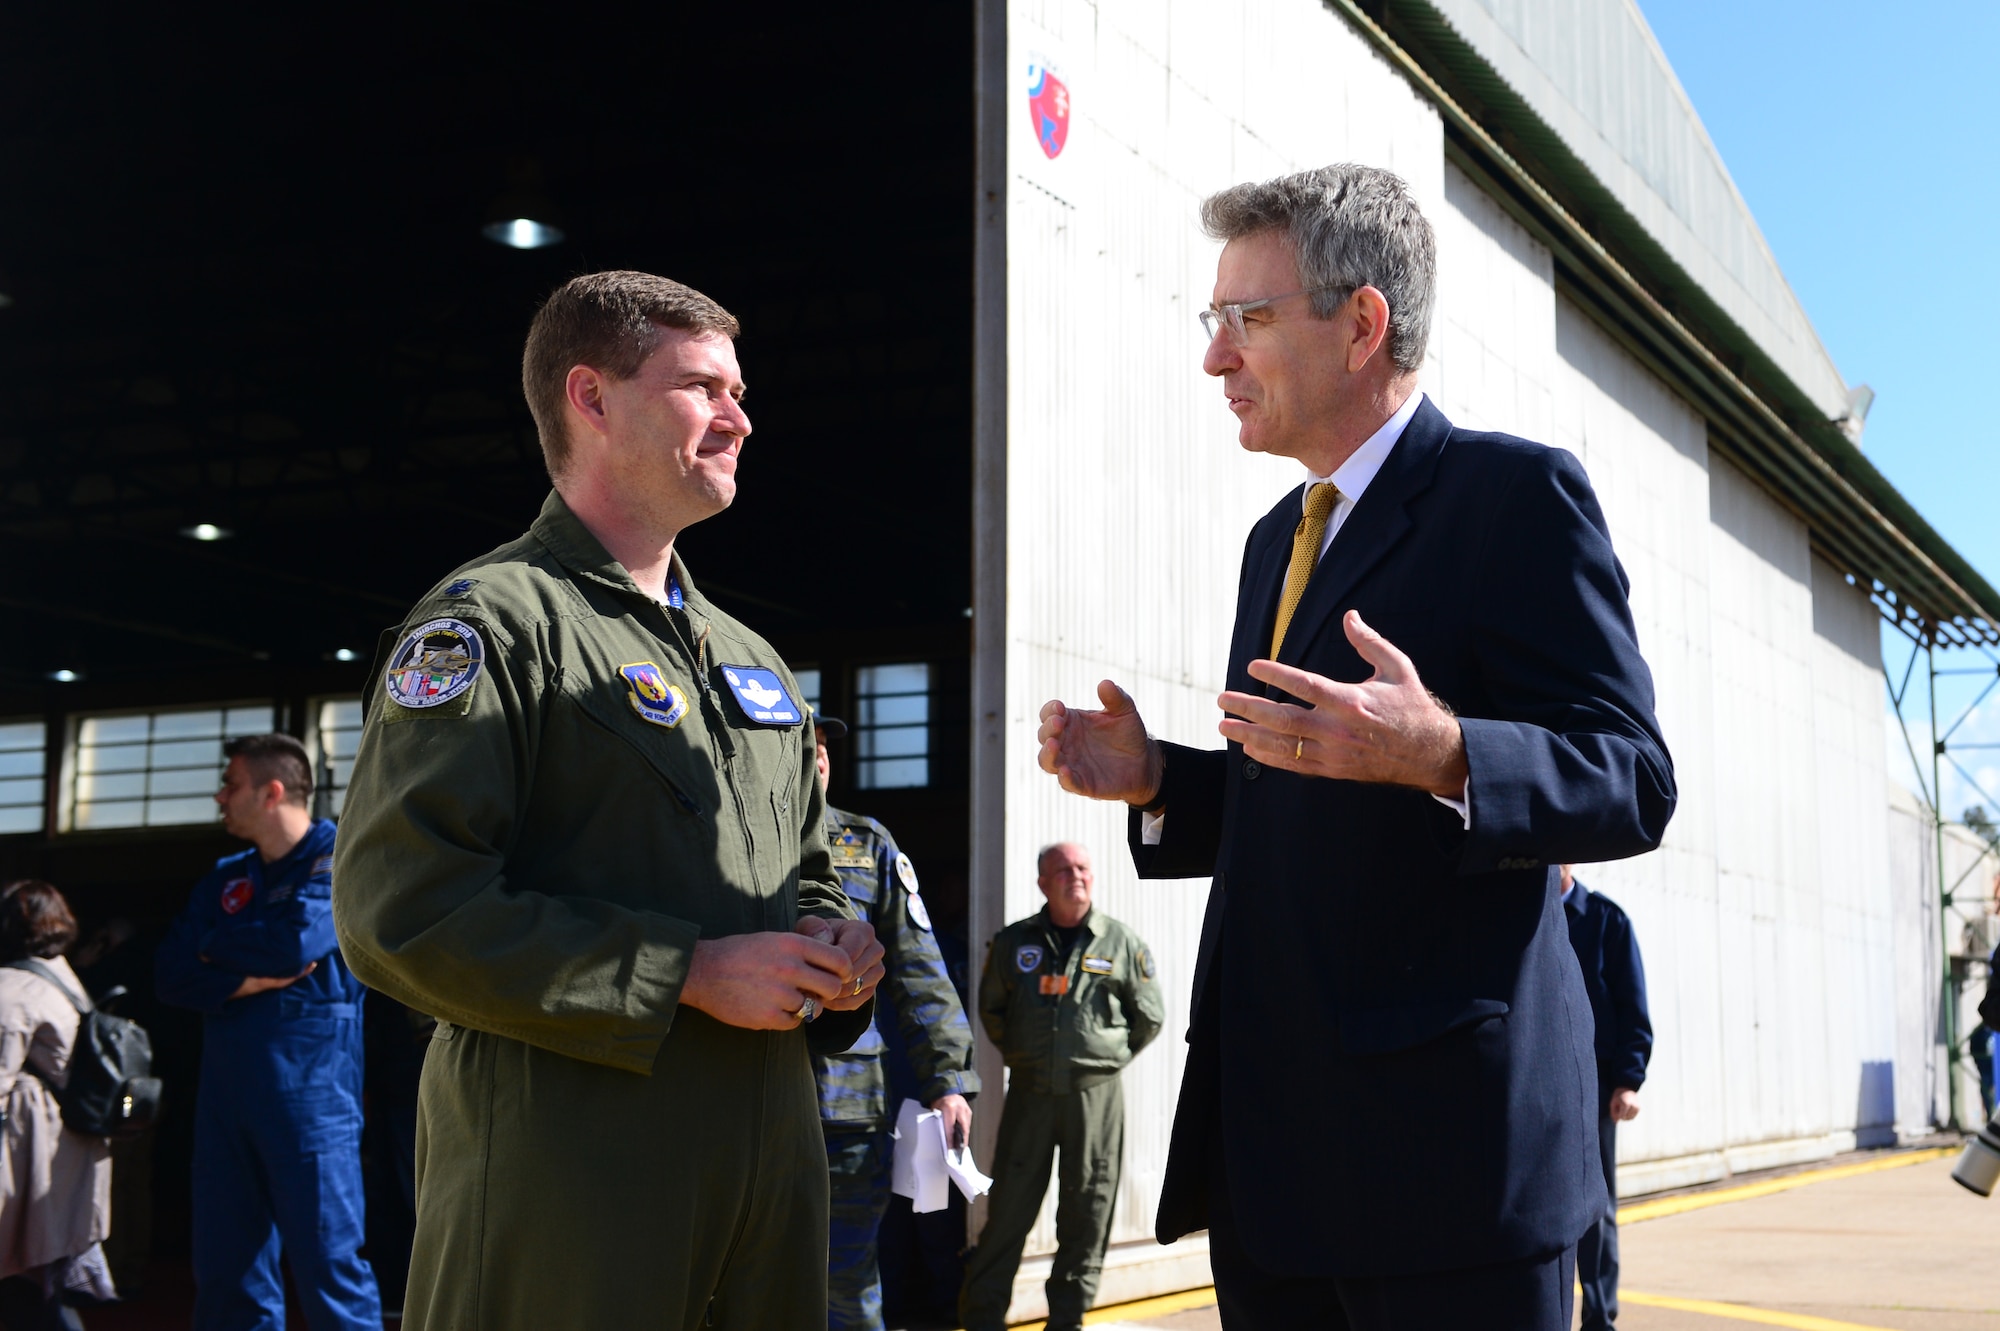 U.S. Ambassador Geoffrey Pyatt discusses INIOHOS 18 with Lt. Col. Jeremy Renken, 492nd Fighter Squadron commander, during the exercise’s media day at Andravida Air Base, Greece, March 20, 2018. Seventy-six fighter aircraft are participating in this year’s iteration of the exercise. (U.S. Air Force photo/1st Lt. Elias Small)